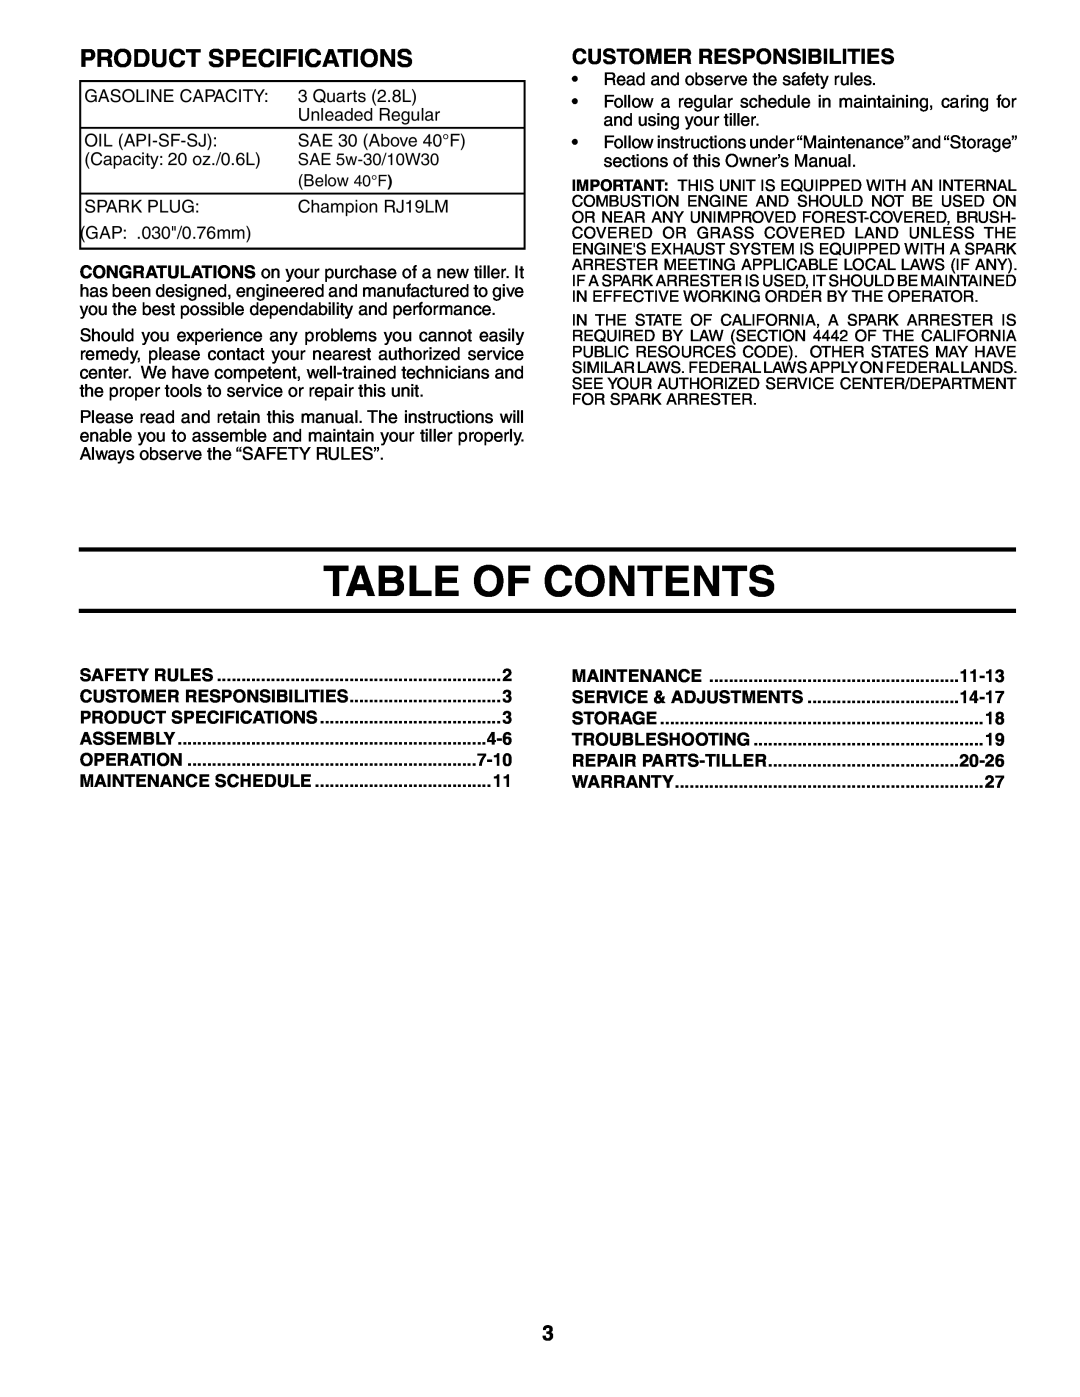 Poulan PRRT65B owner manual Table Of Contents, Product Specifications, Customer Responsibilities, 7-10, 11-13, 14-17, 20-26 